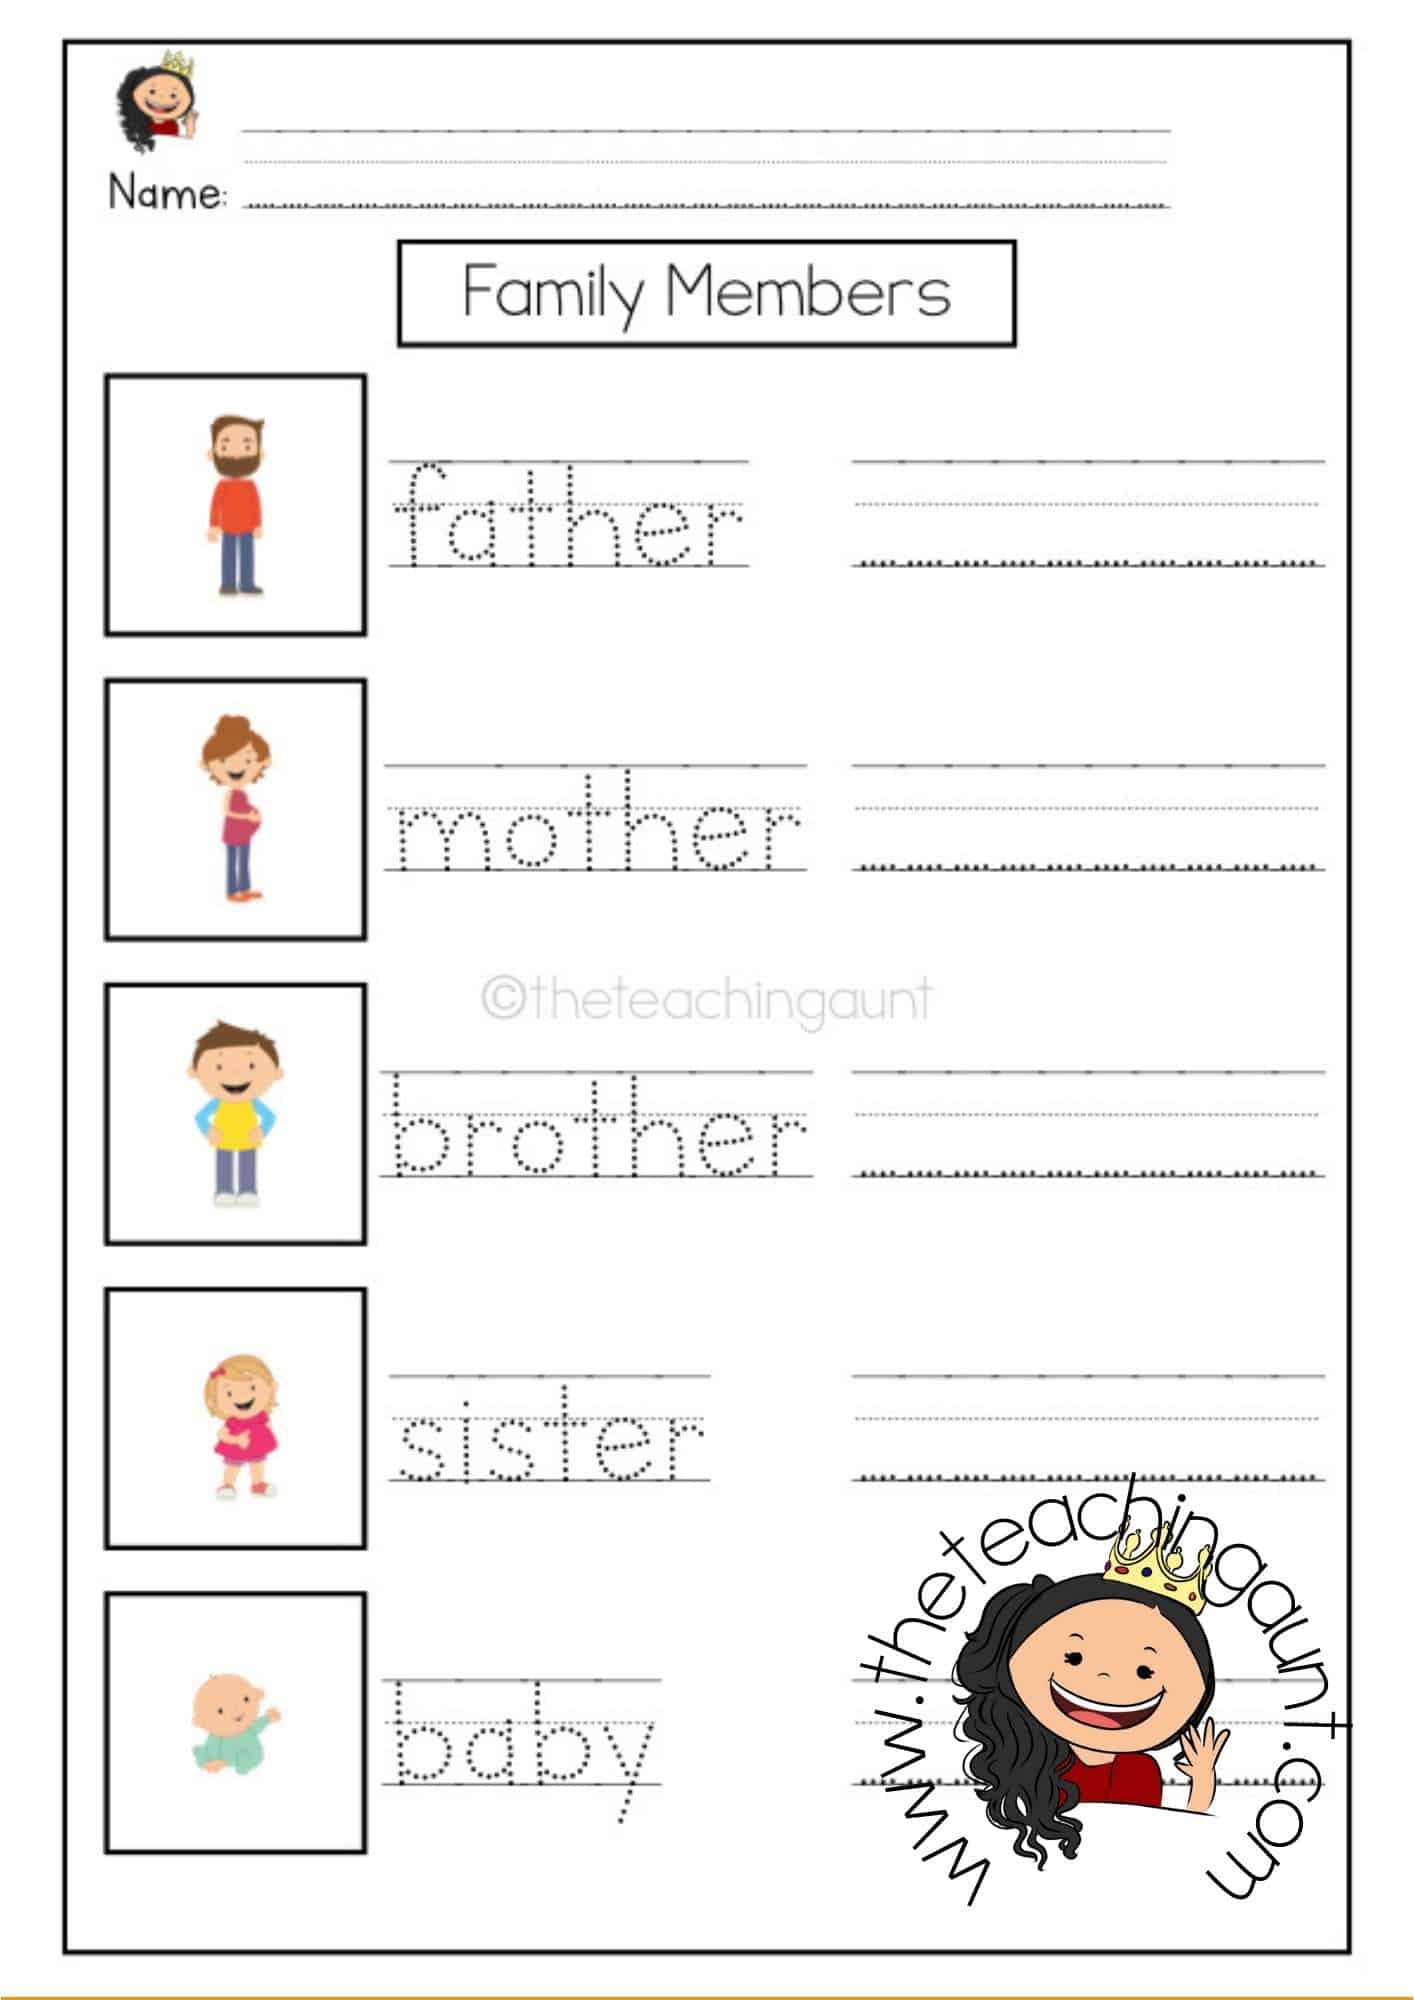 Free Family Members Tracing and Writing Worksheets from The Teaching Aunt